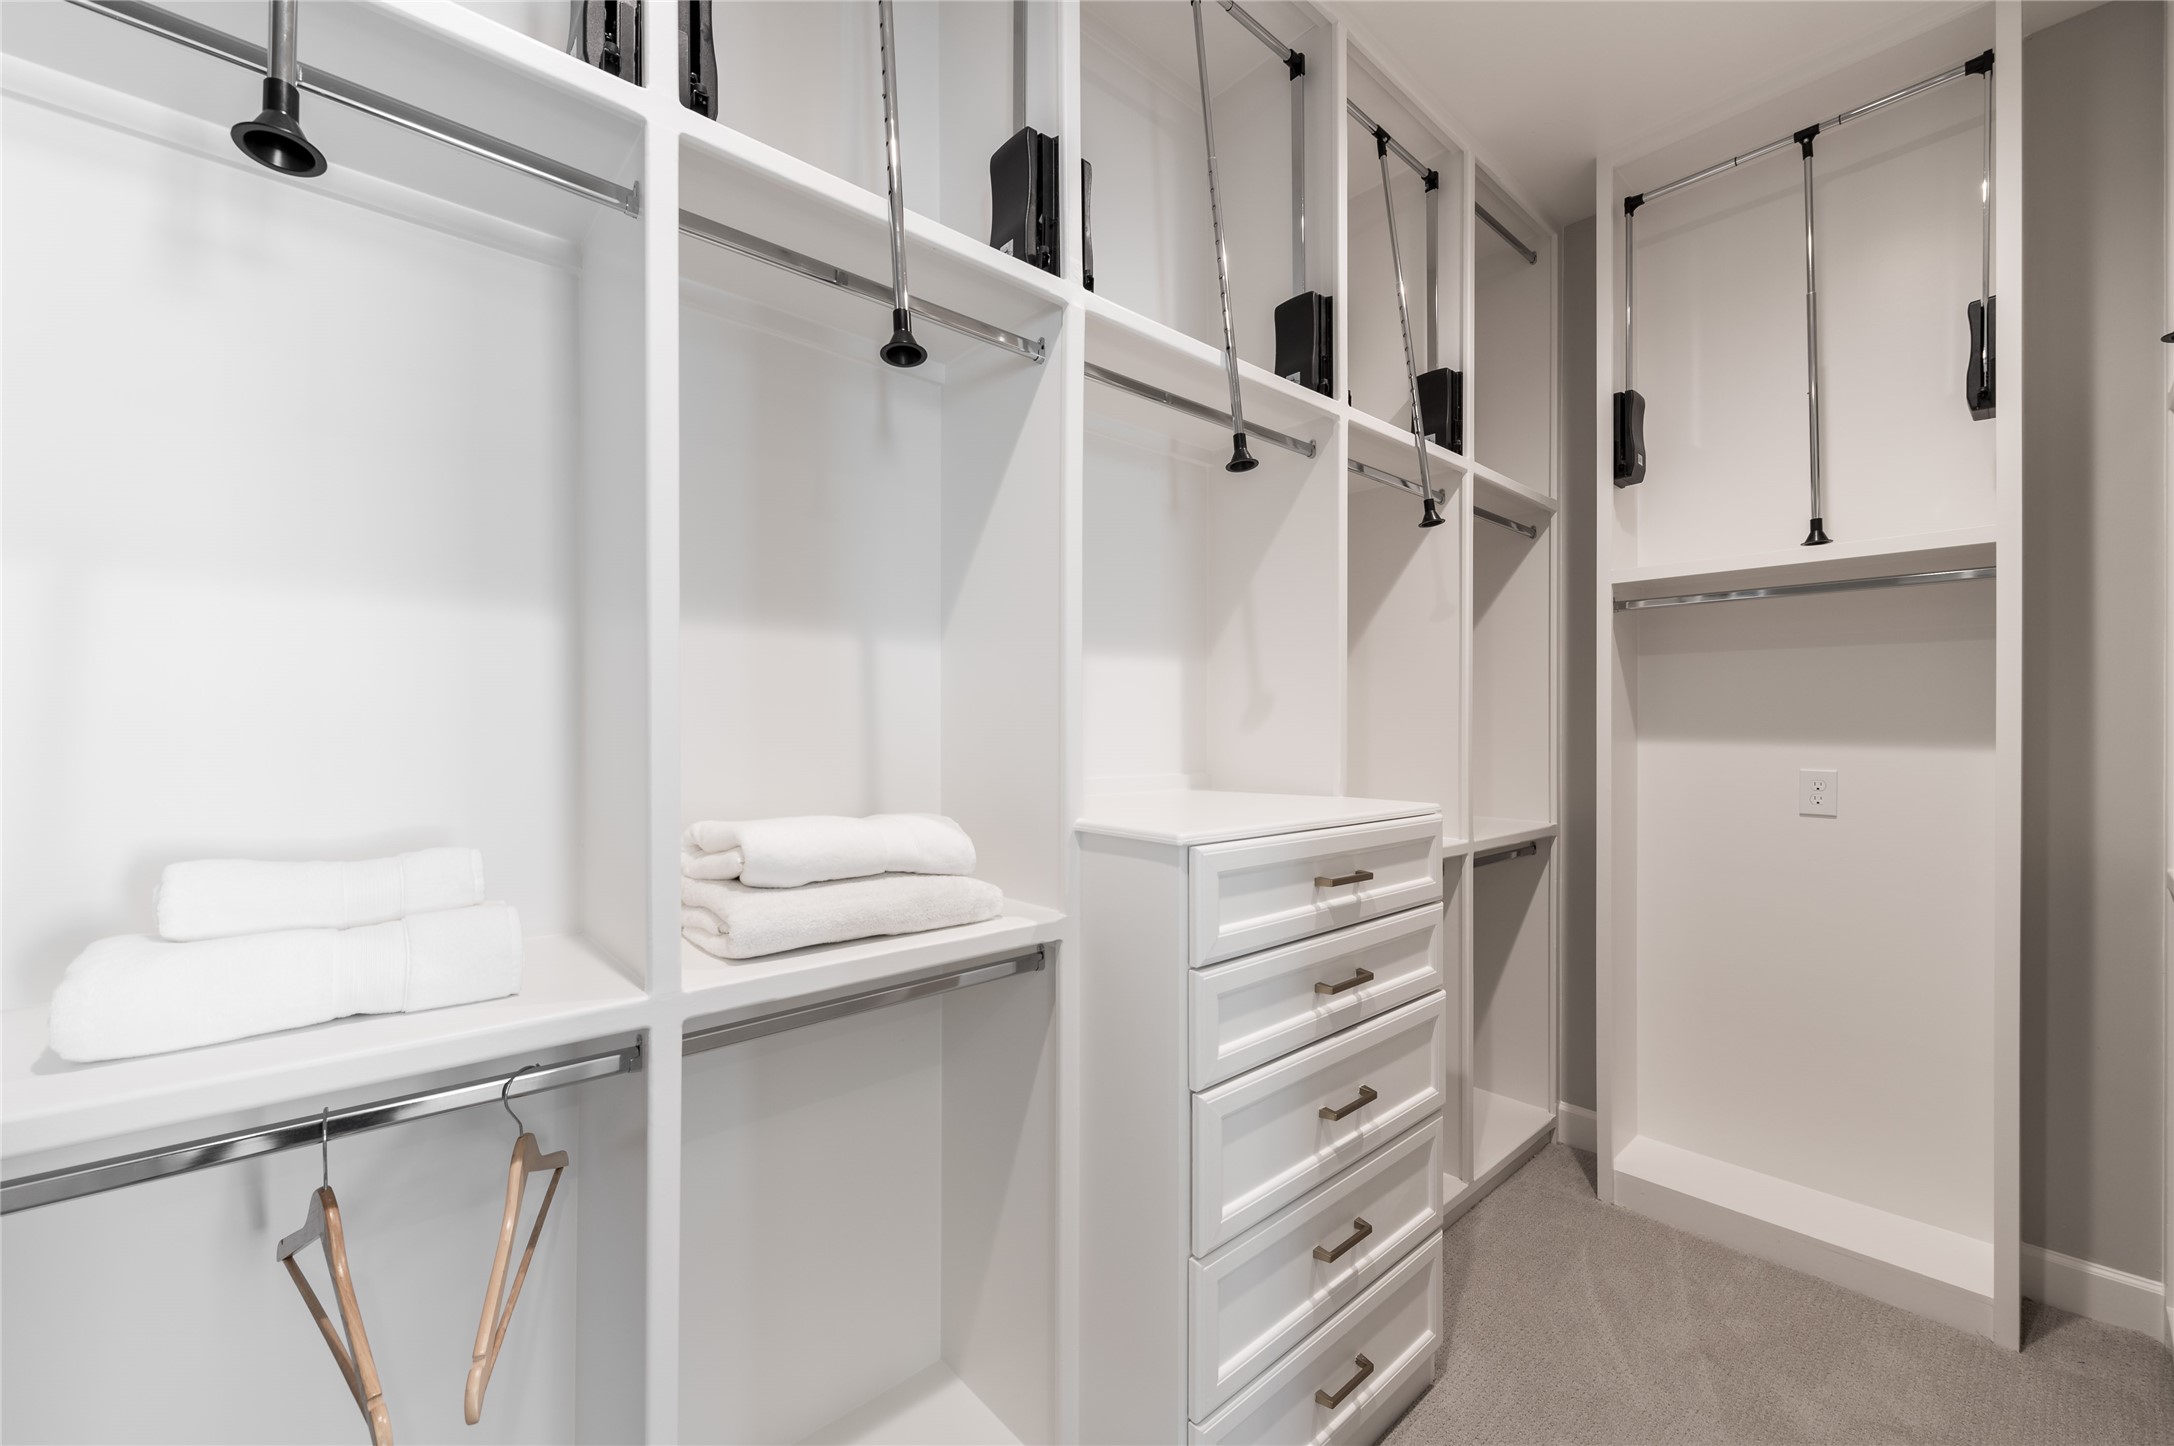 Walk-in closet has custom built-ins and
pull-down rods for easy access and
organization.